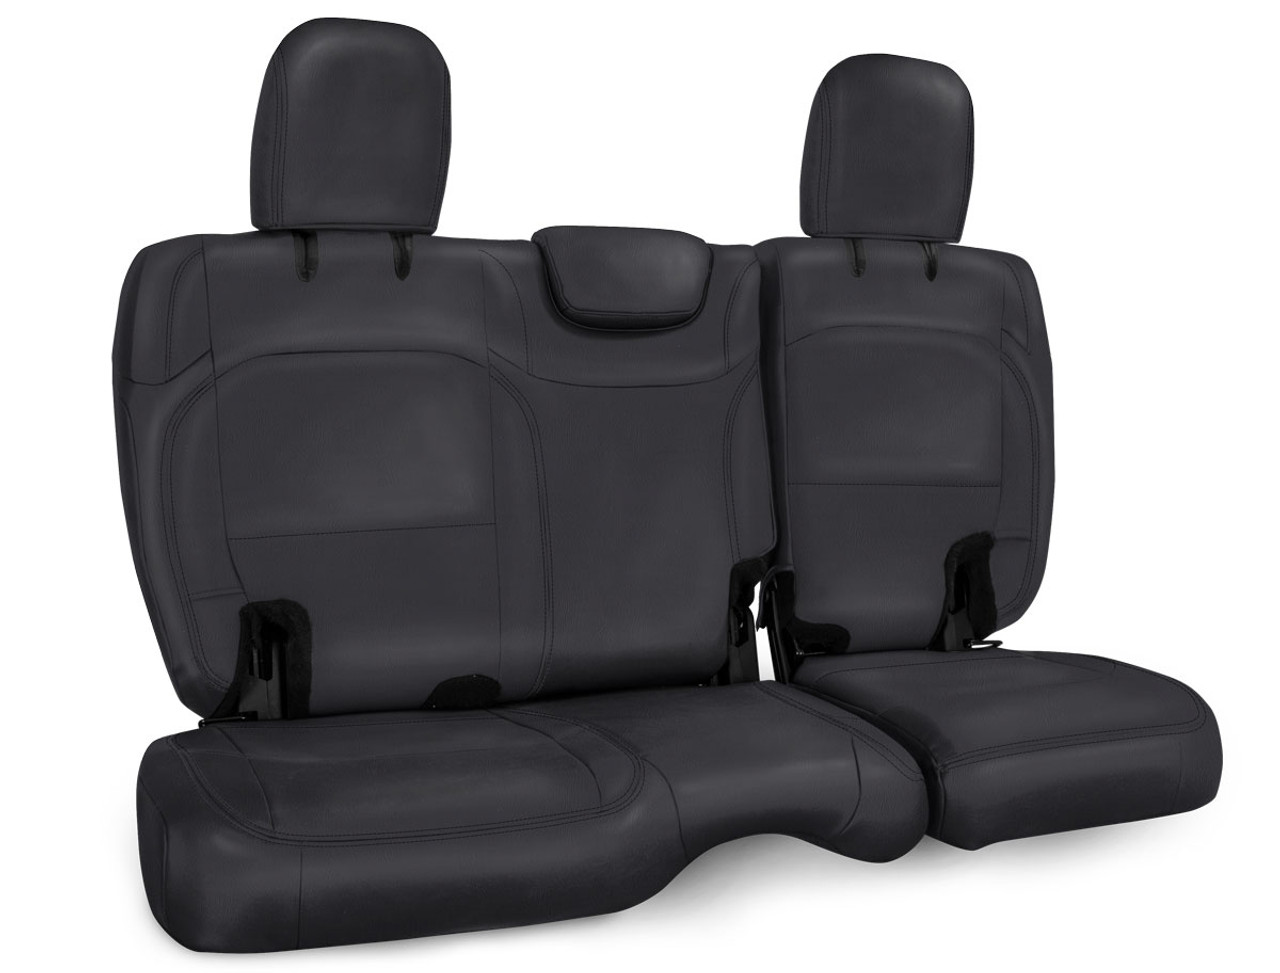 Rear Bench Cover for Jeep Wrangler JL, 2 door - All Black